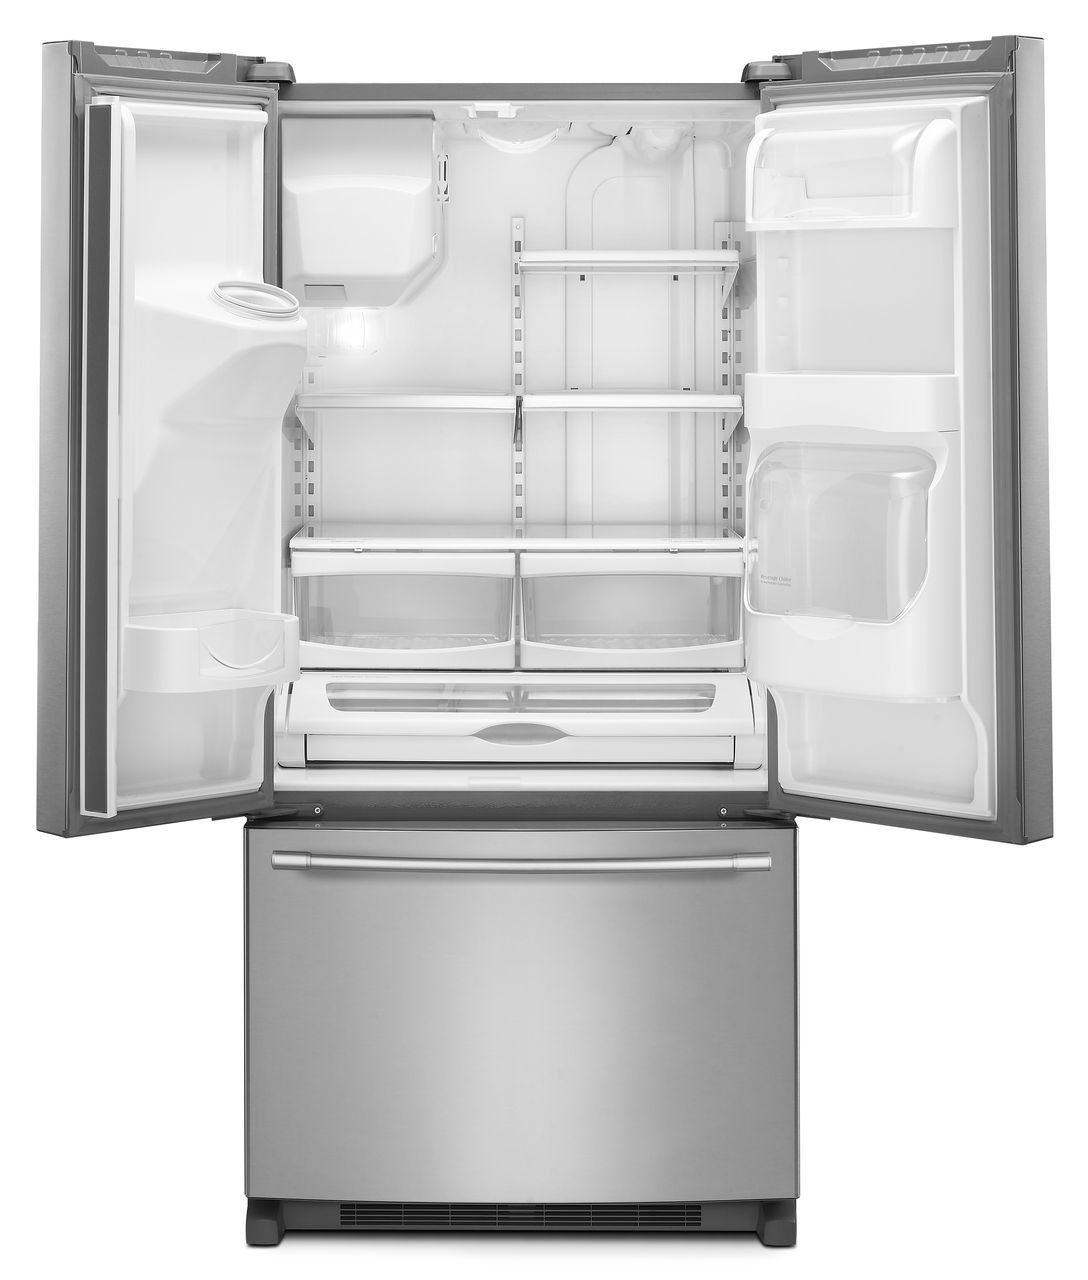 Maytag refrigerator with open doors